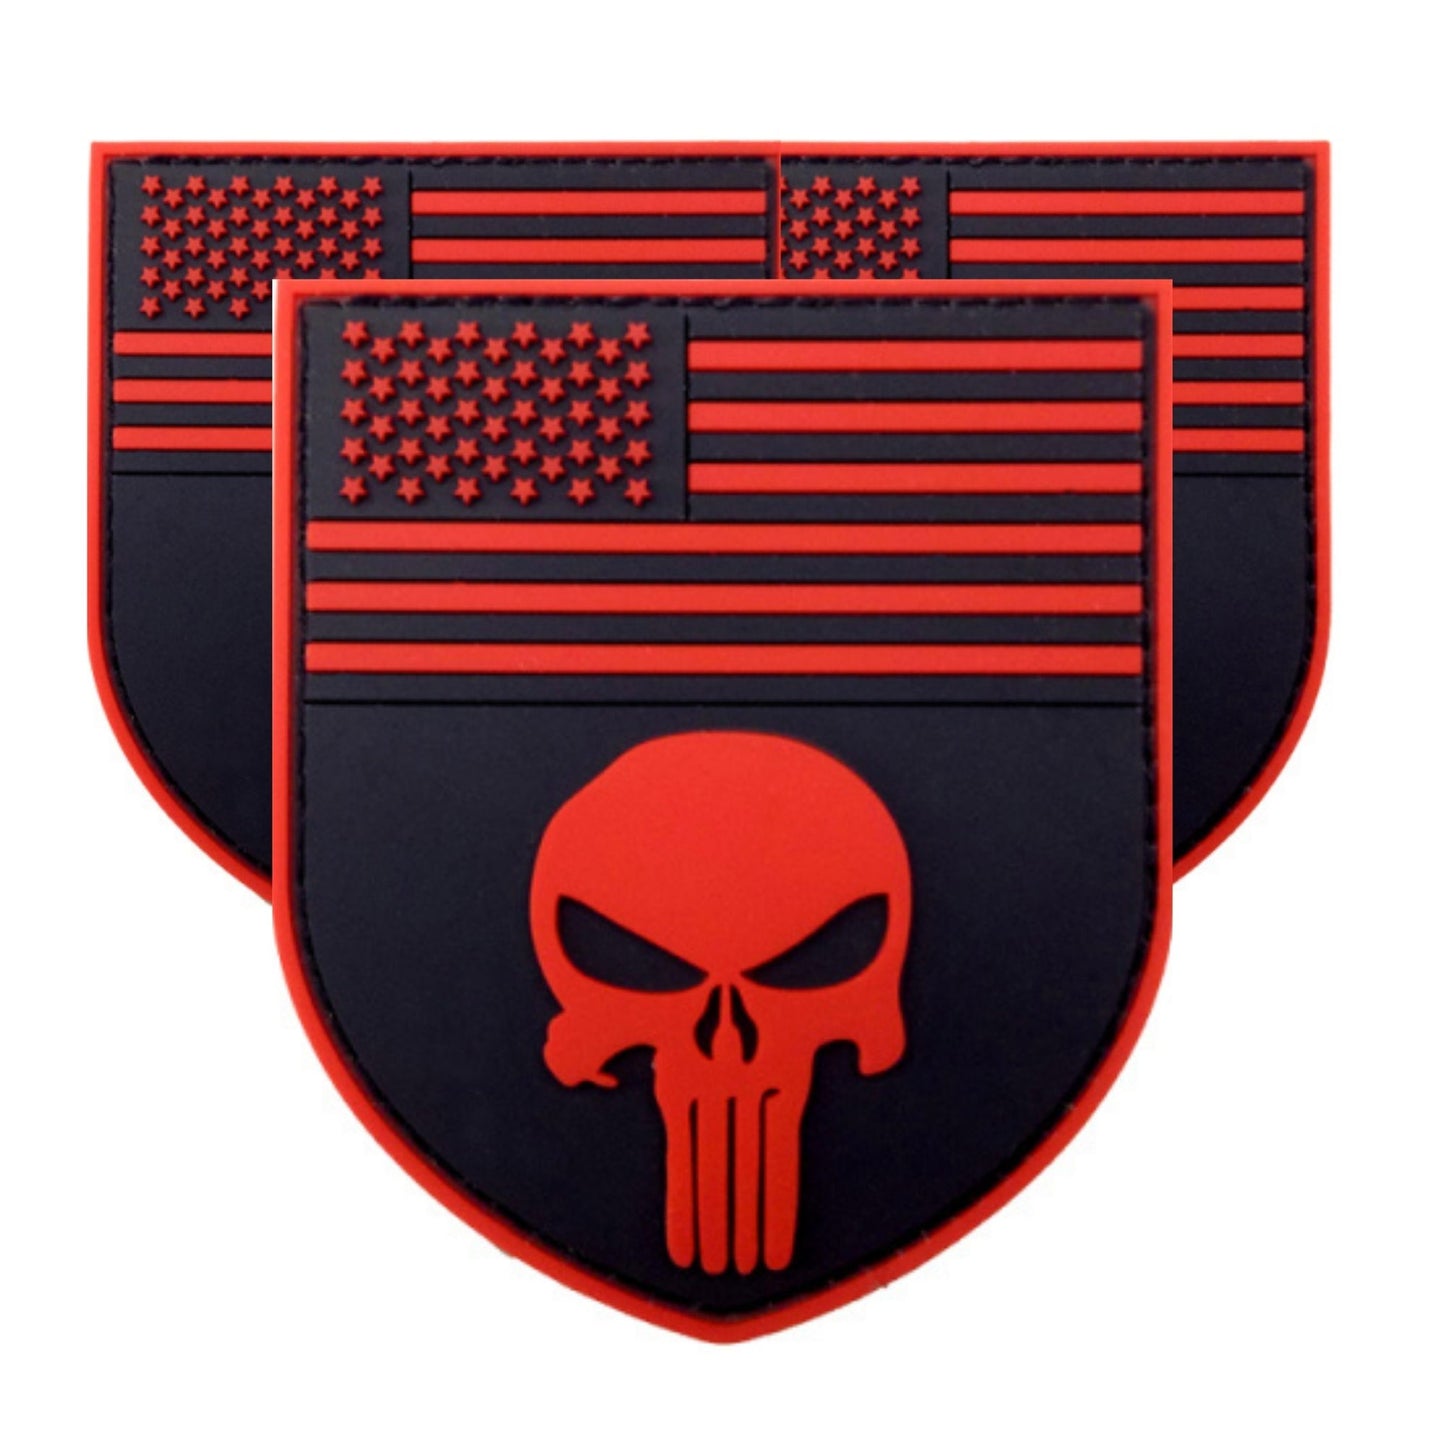 USA Red Flag Skull Shield Vinyl PVC 3 x 3.75" Patch With Hook Backing (50% OFF)